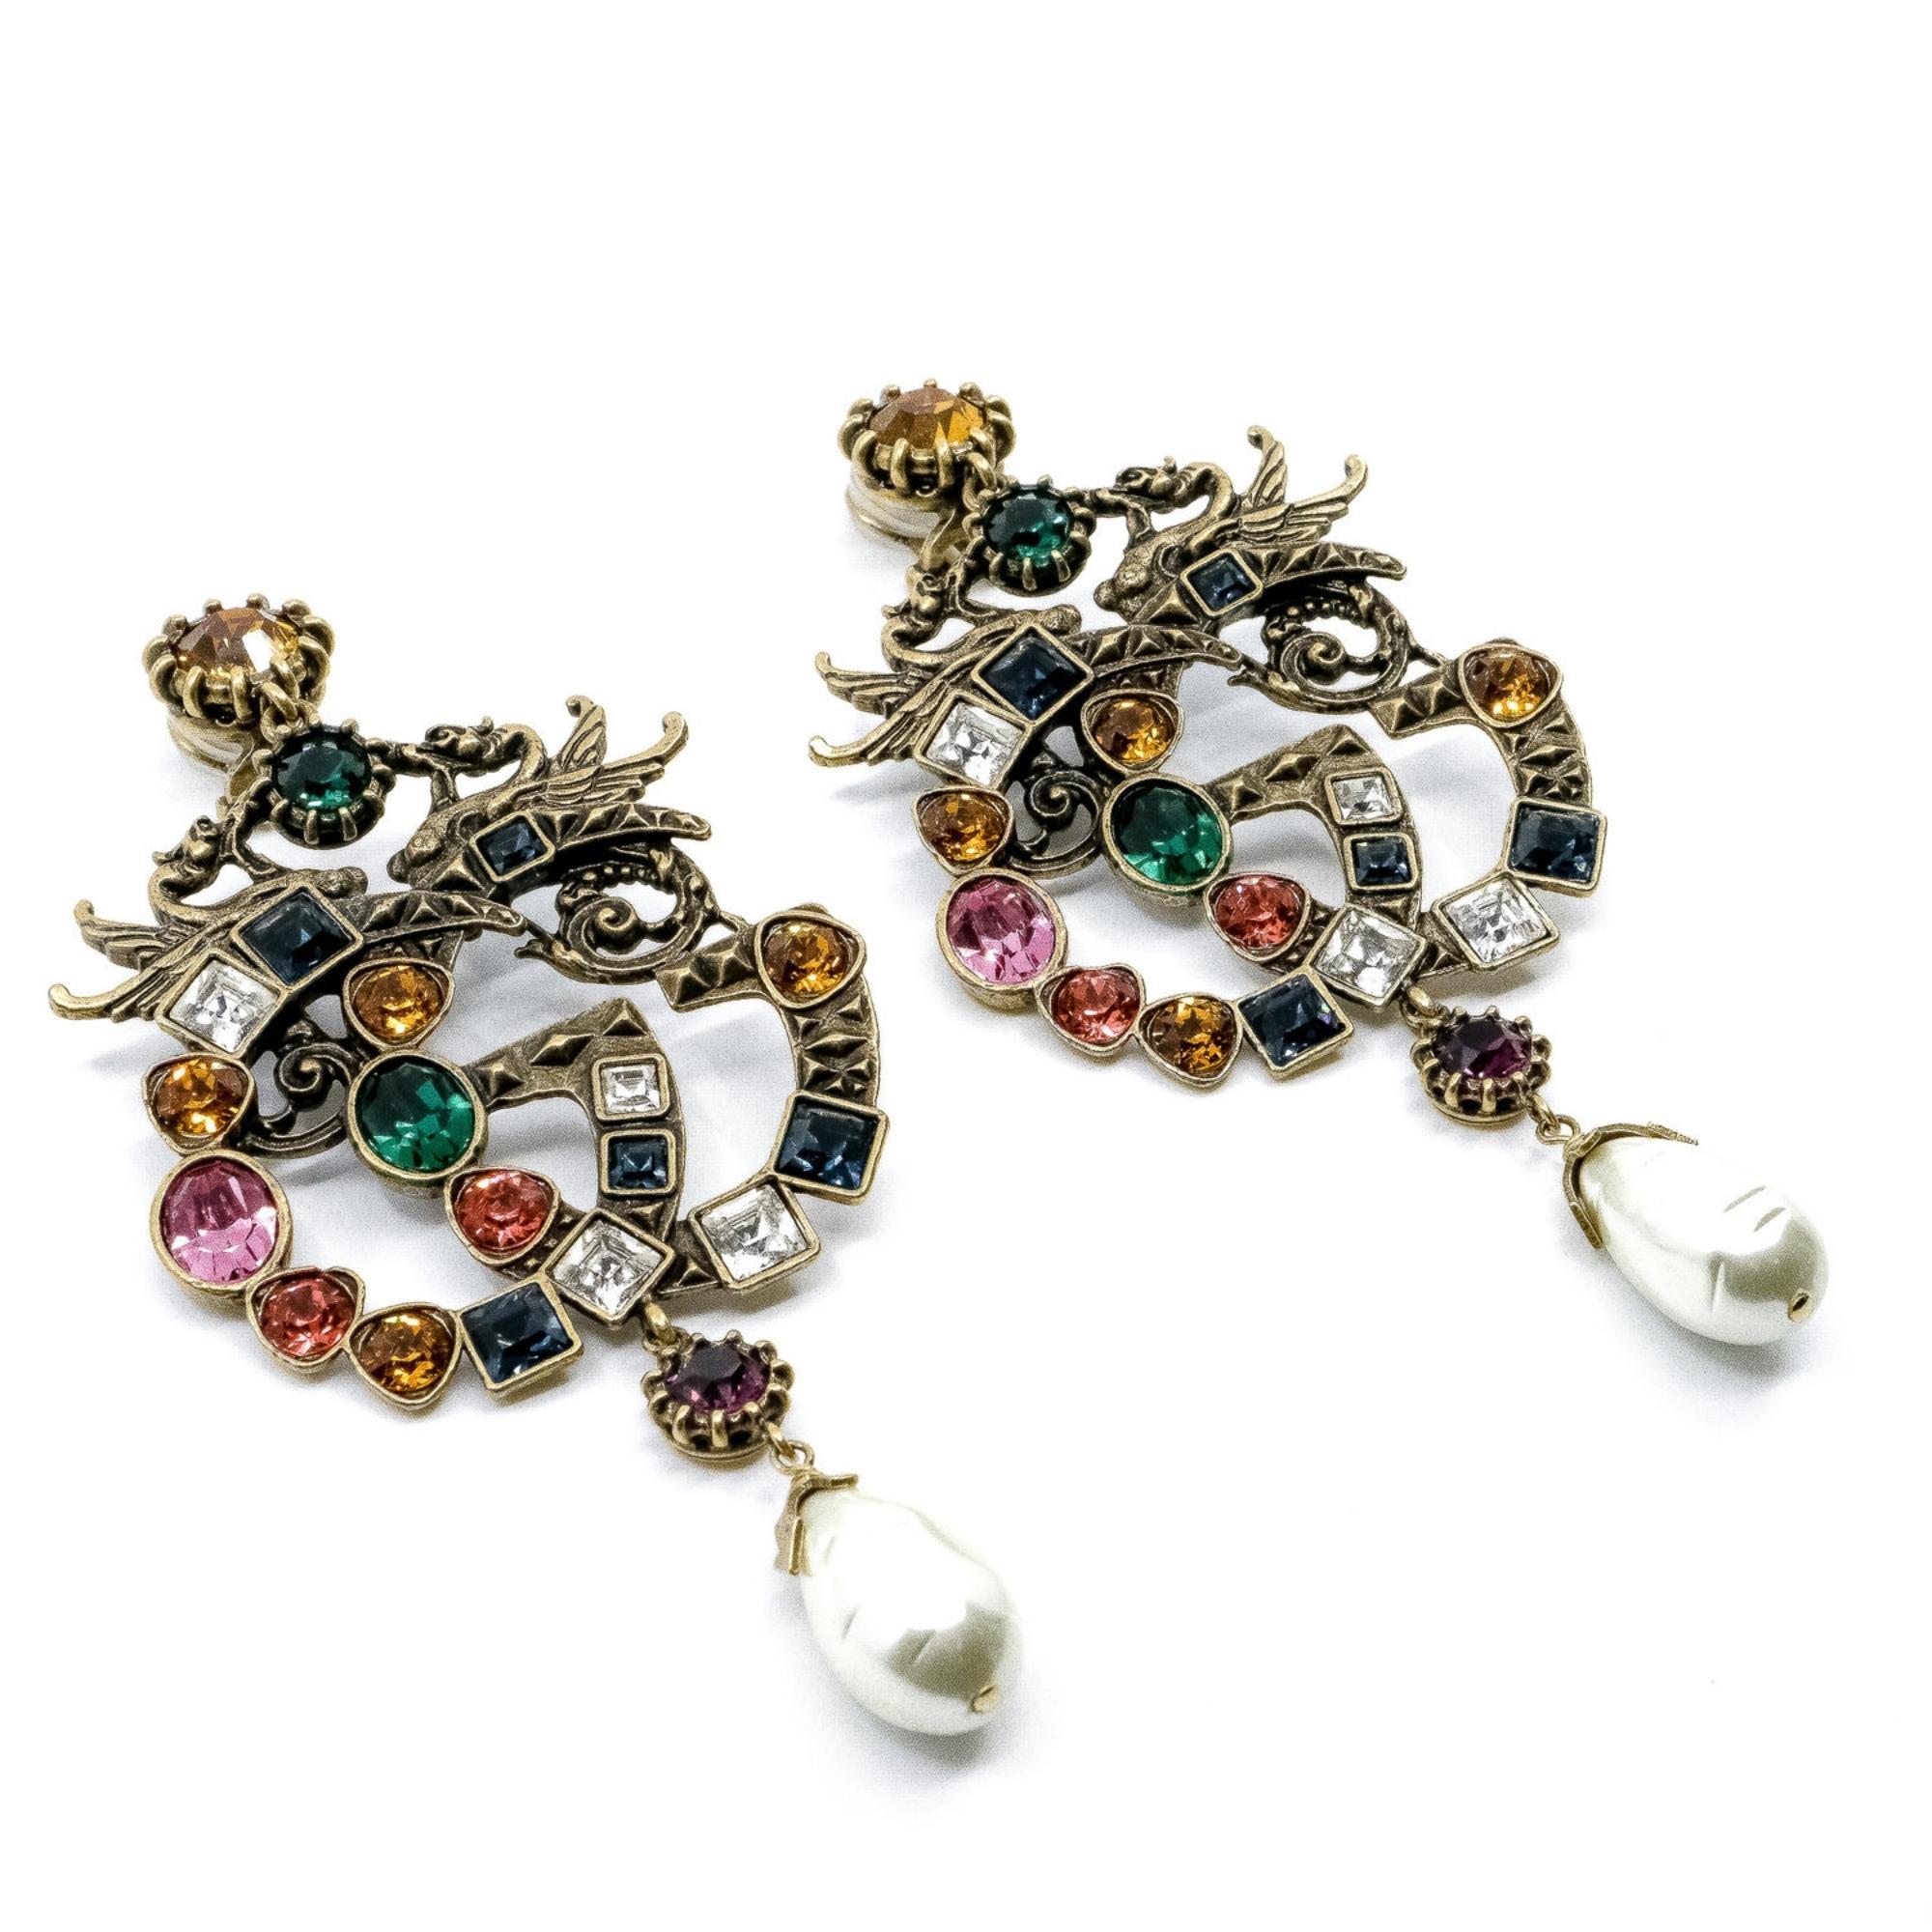 These classic GG Gucci earrings are made in an aged gold tone metal and embellished with large pearls snd the GG logo encrusted in multicolored crystals.

Color: Gold tone and multicolour strass
Material: Gold-Tone Metal, Faux Pearl,